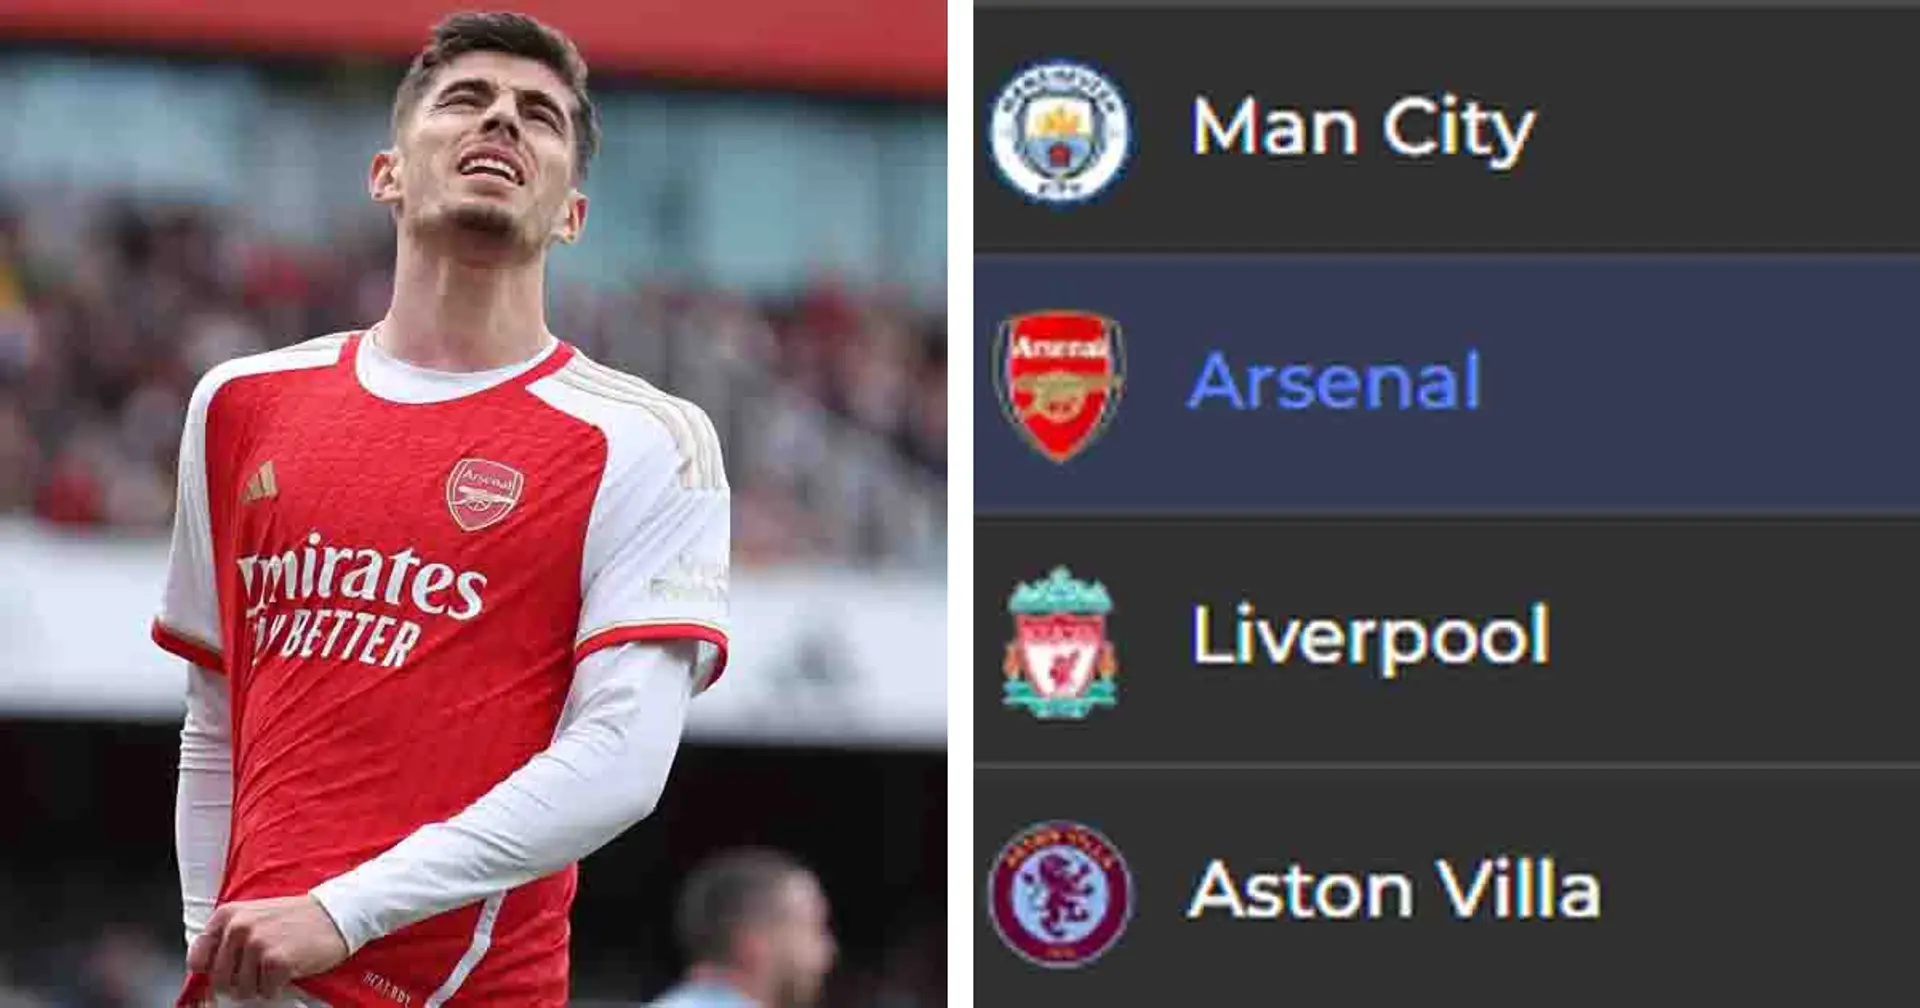 Arsenal slip up at worst time: how Premier League table looks like after Aston Villa loss